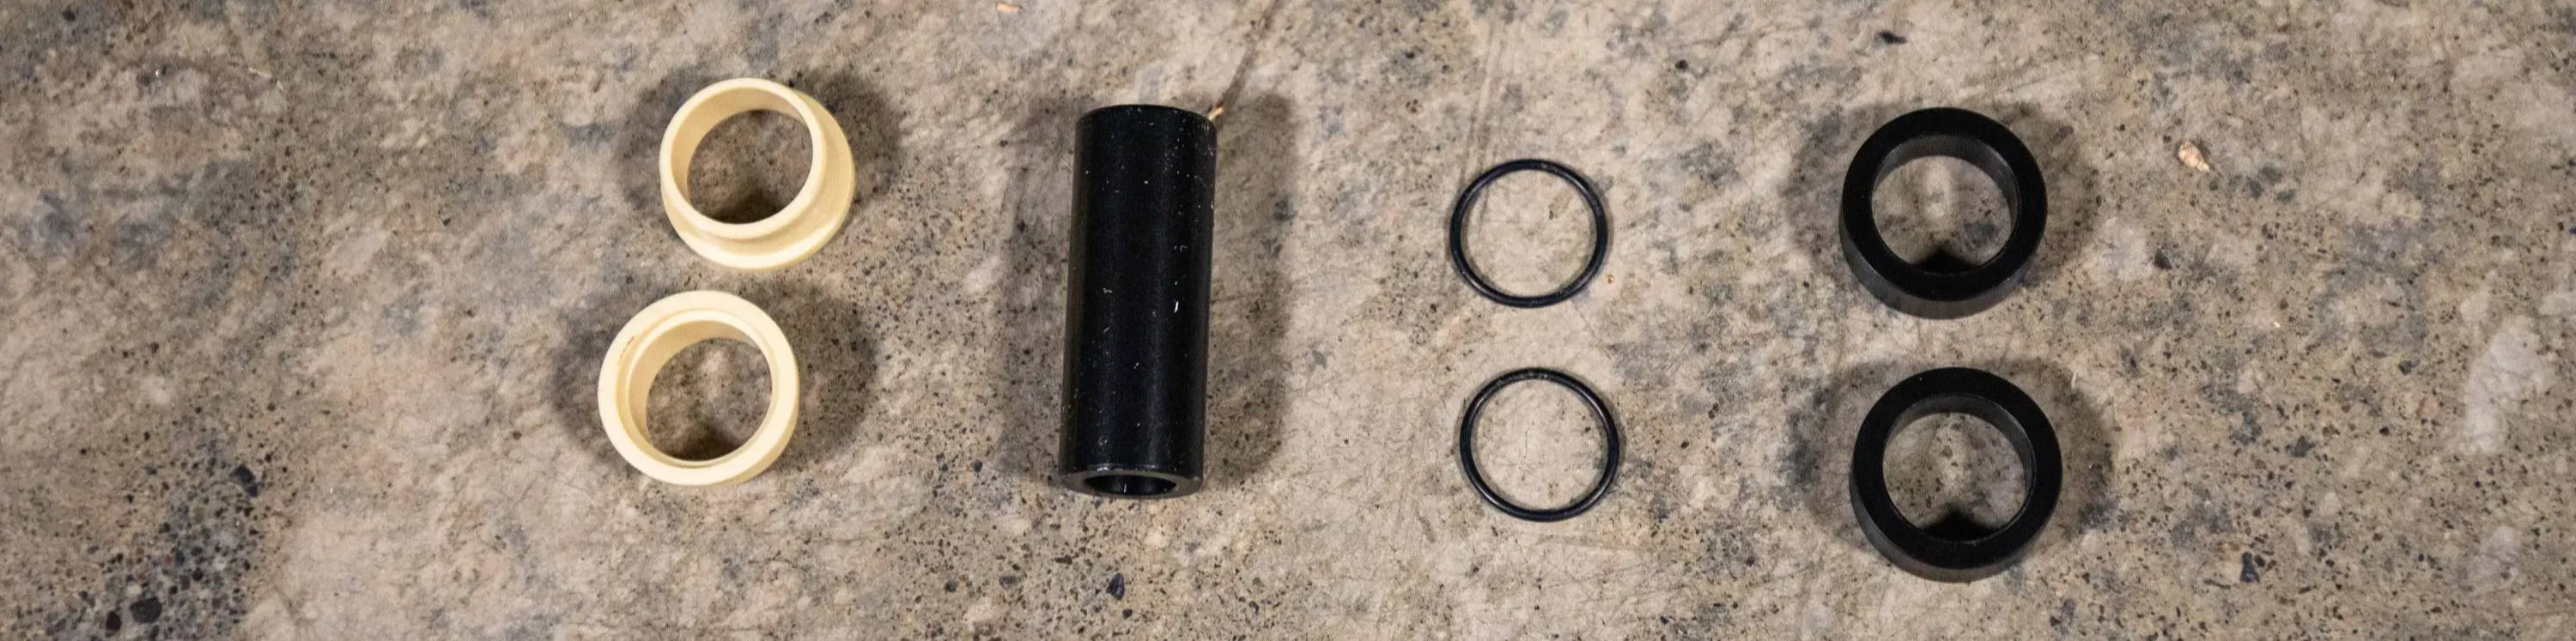 Mountain Bike Rear Shock Mounting hardware components layed out on the floor